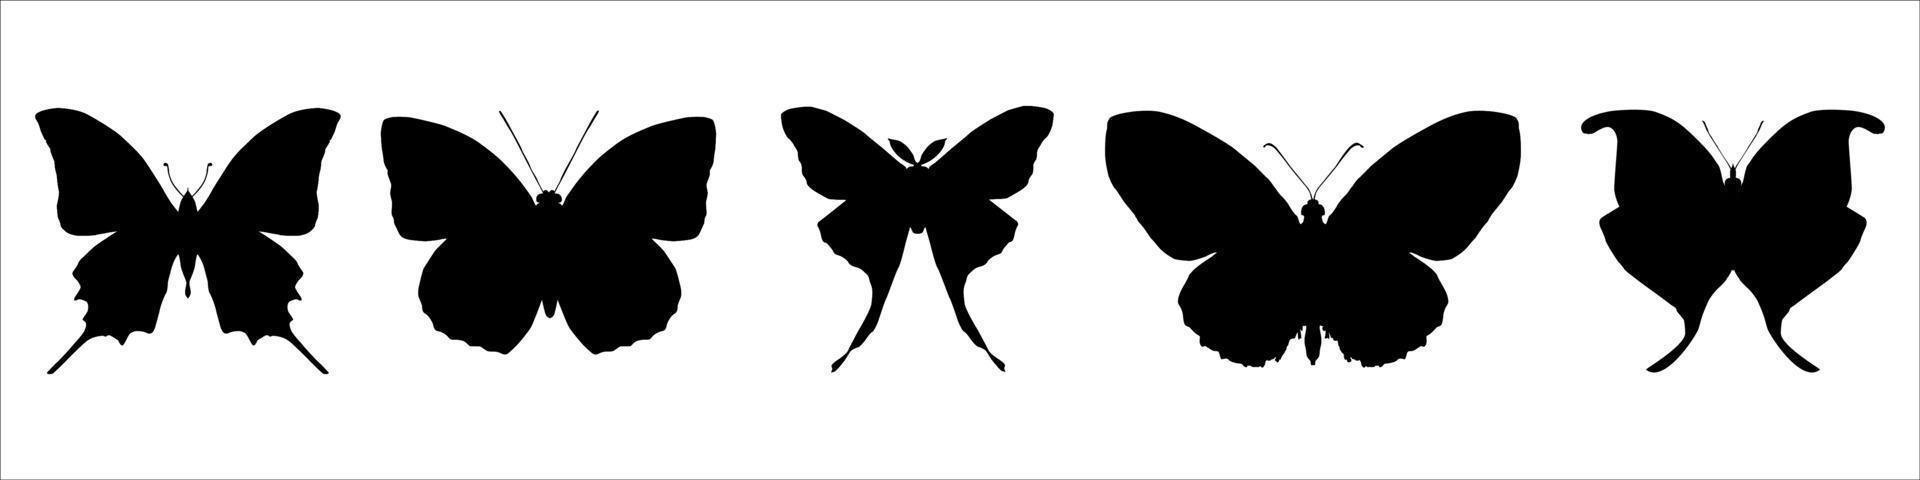 Black butterfly vector icons